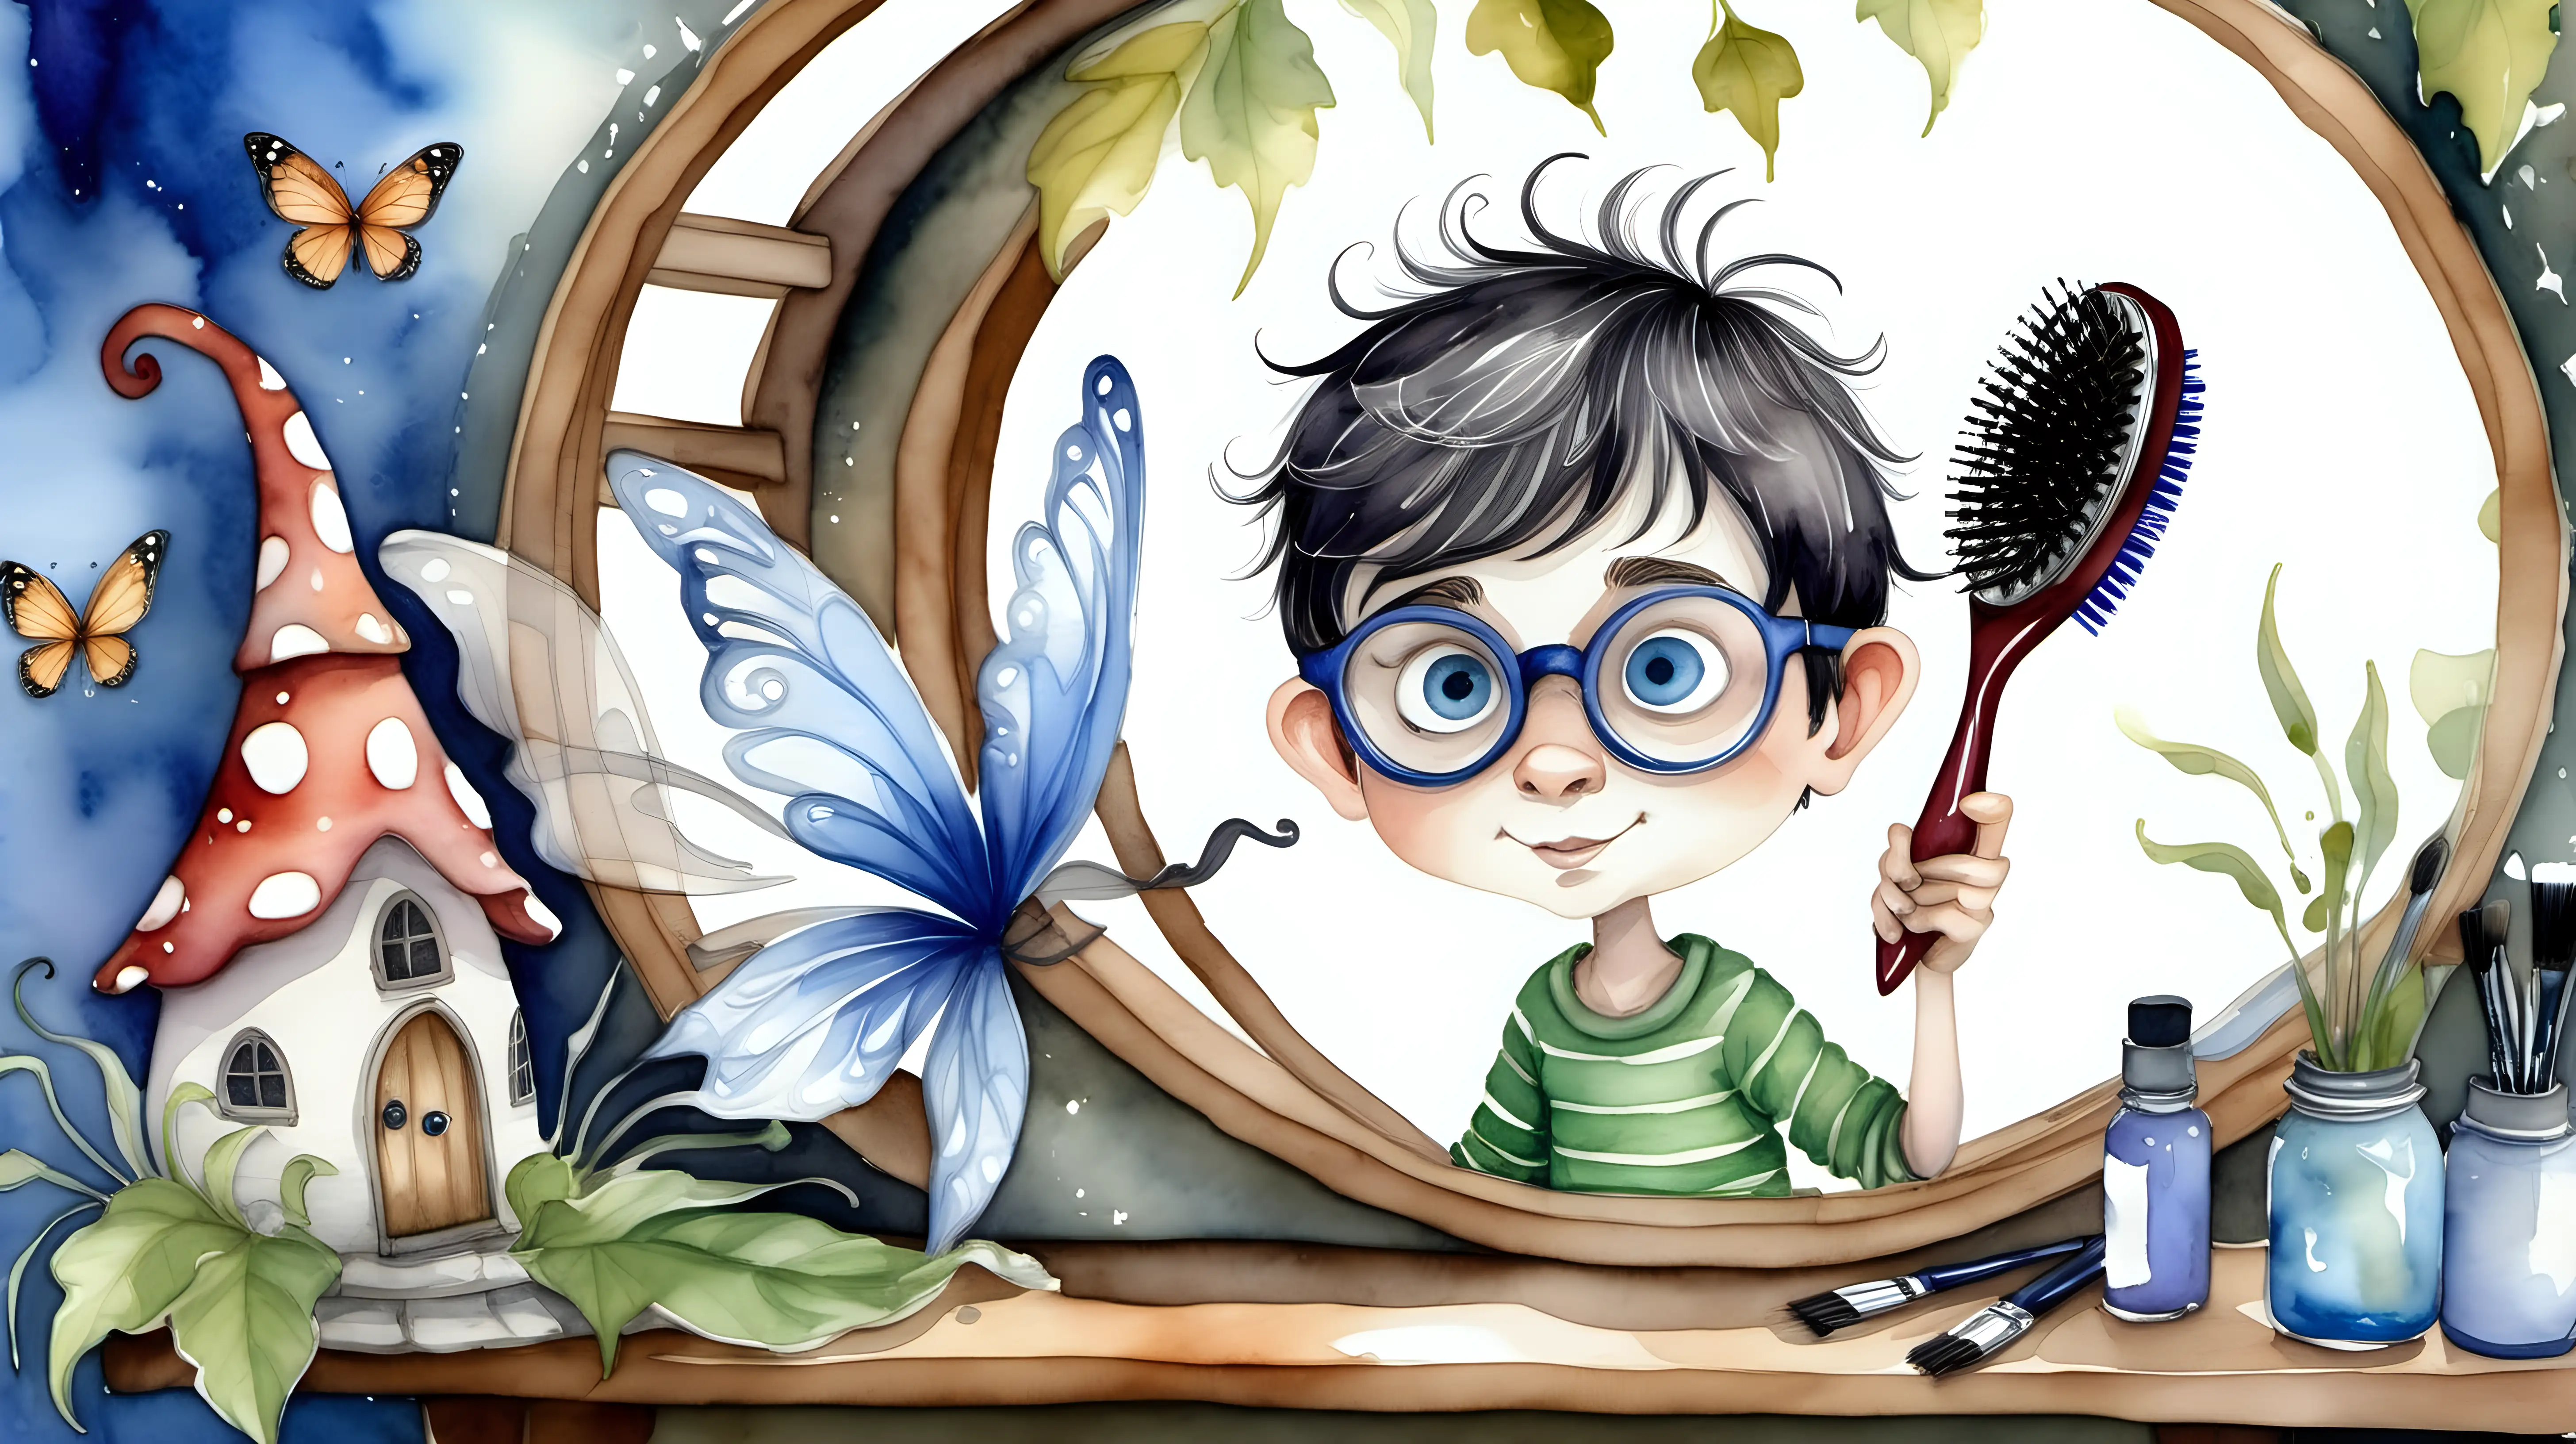 Enchanting Watercolor Fairytale BlueEyed Male Pixie Grooming in a Magical Fairy House